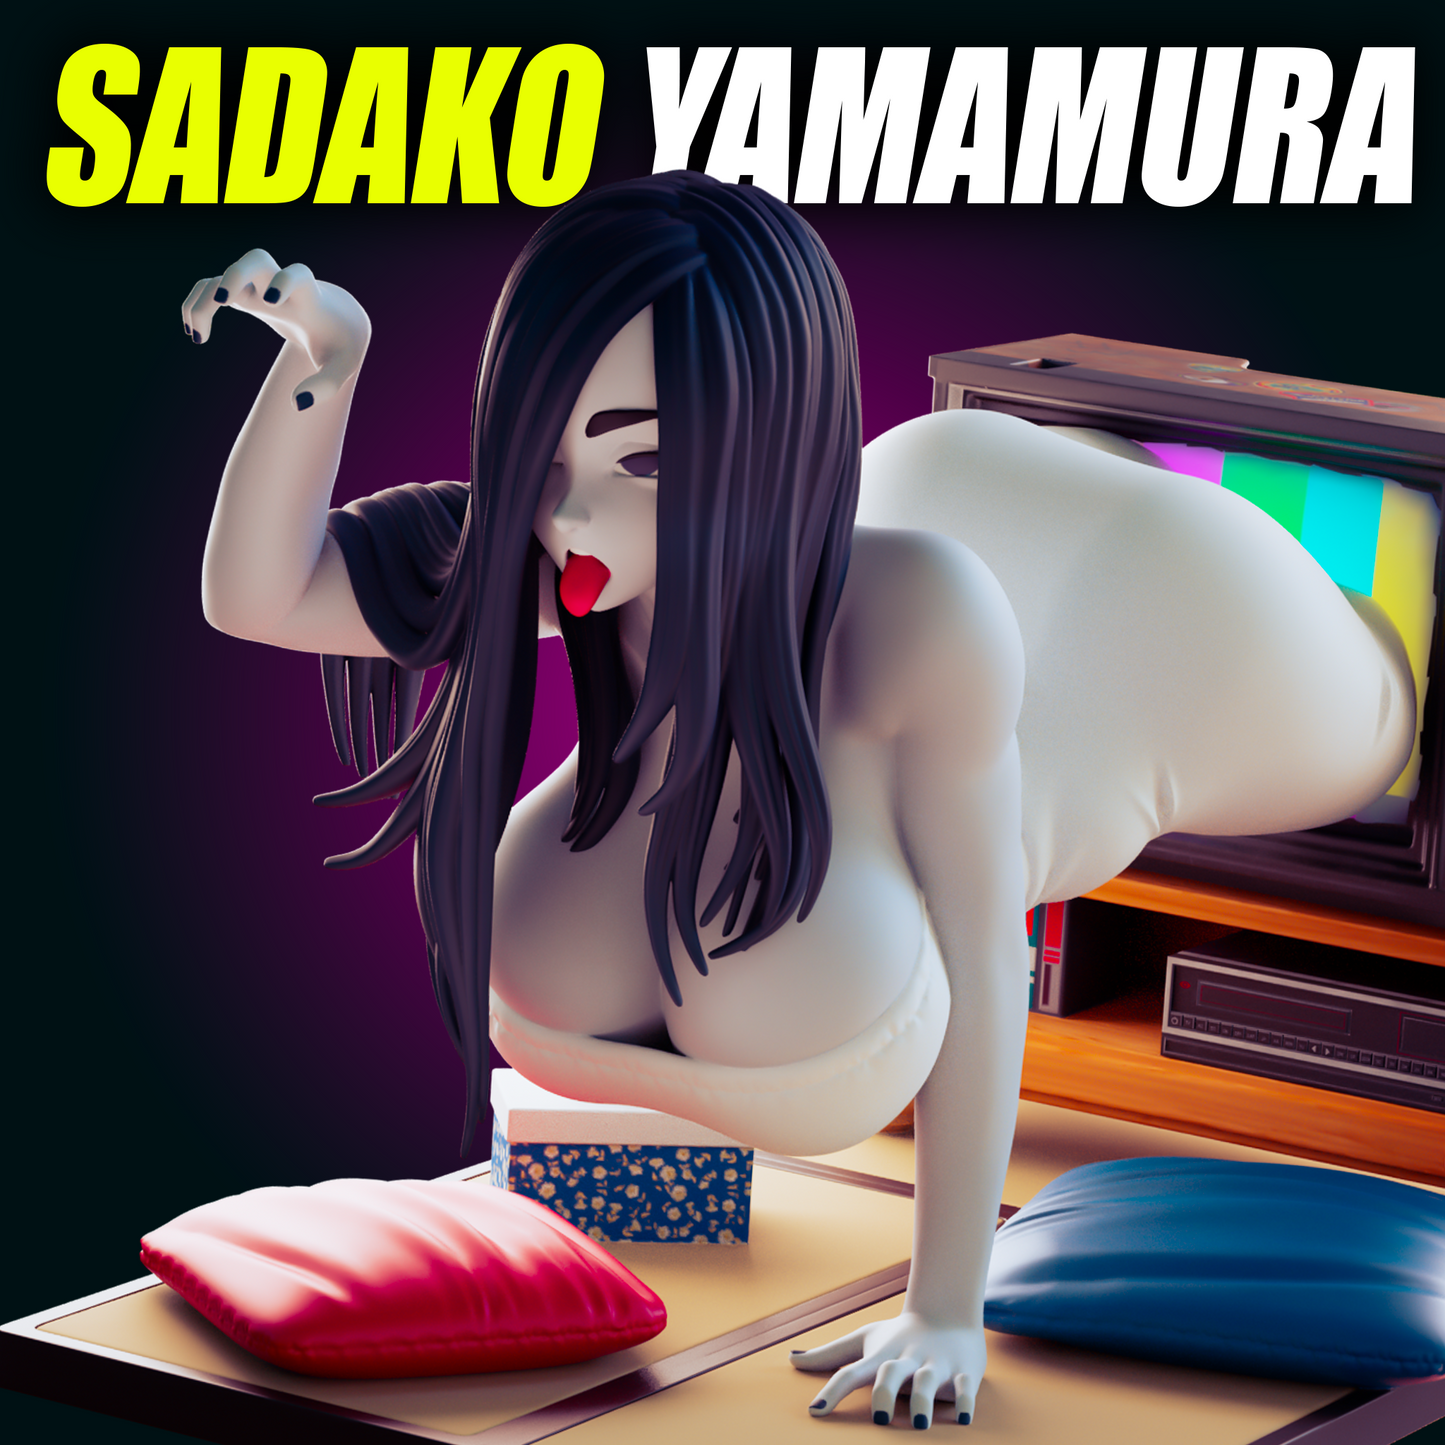 Sadako Yamamura (FUTA editions are now available for all ADULT figures) Officer Rhu Fan Creations Model Kit for painting and collecting.